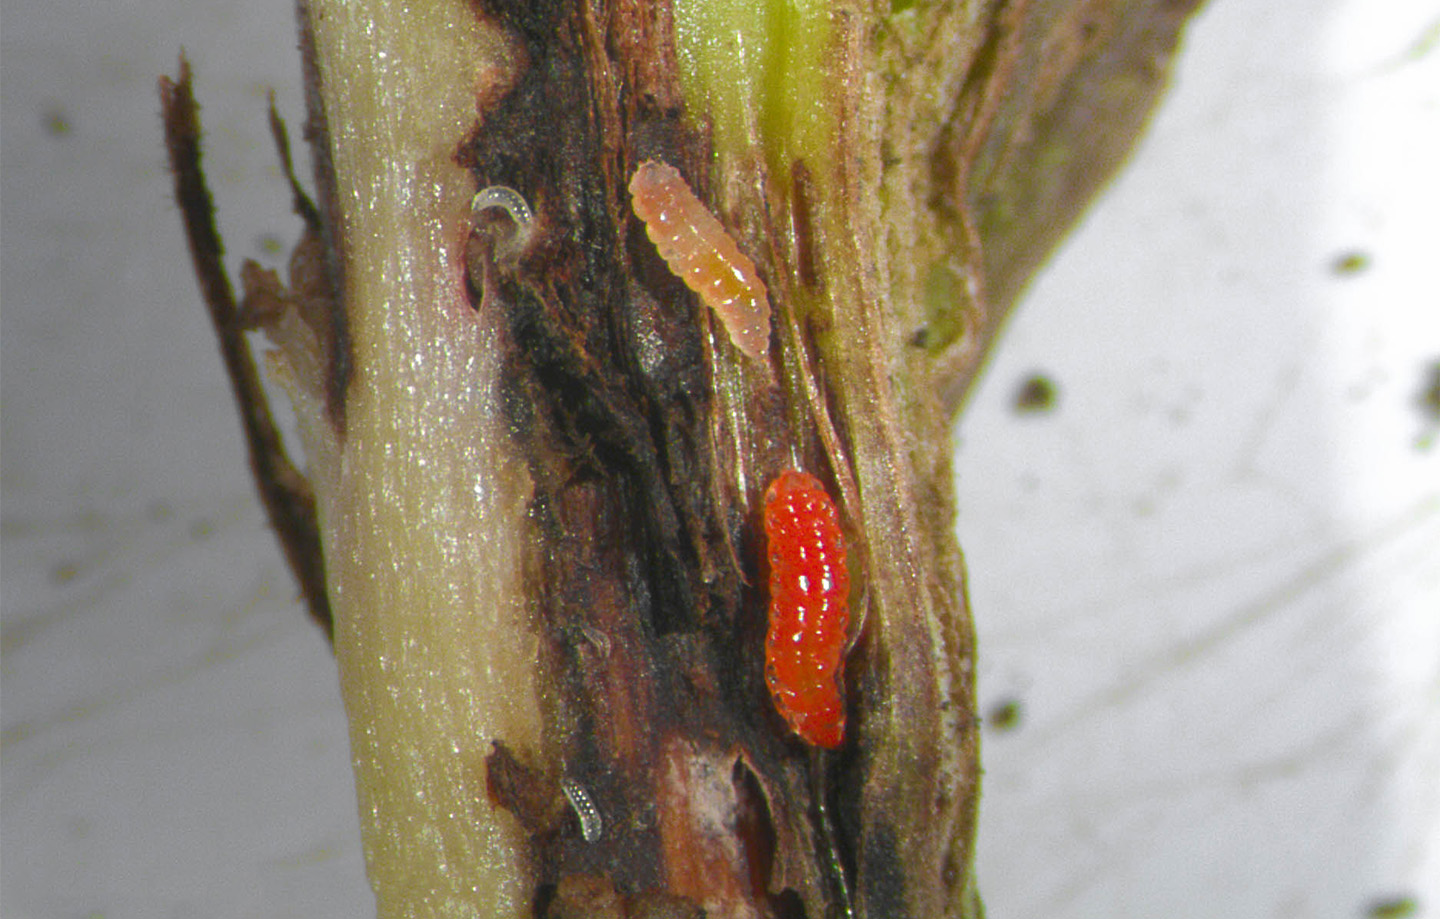 The soybean gall midge can be red to orange in color an